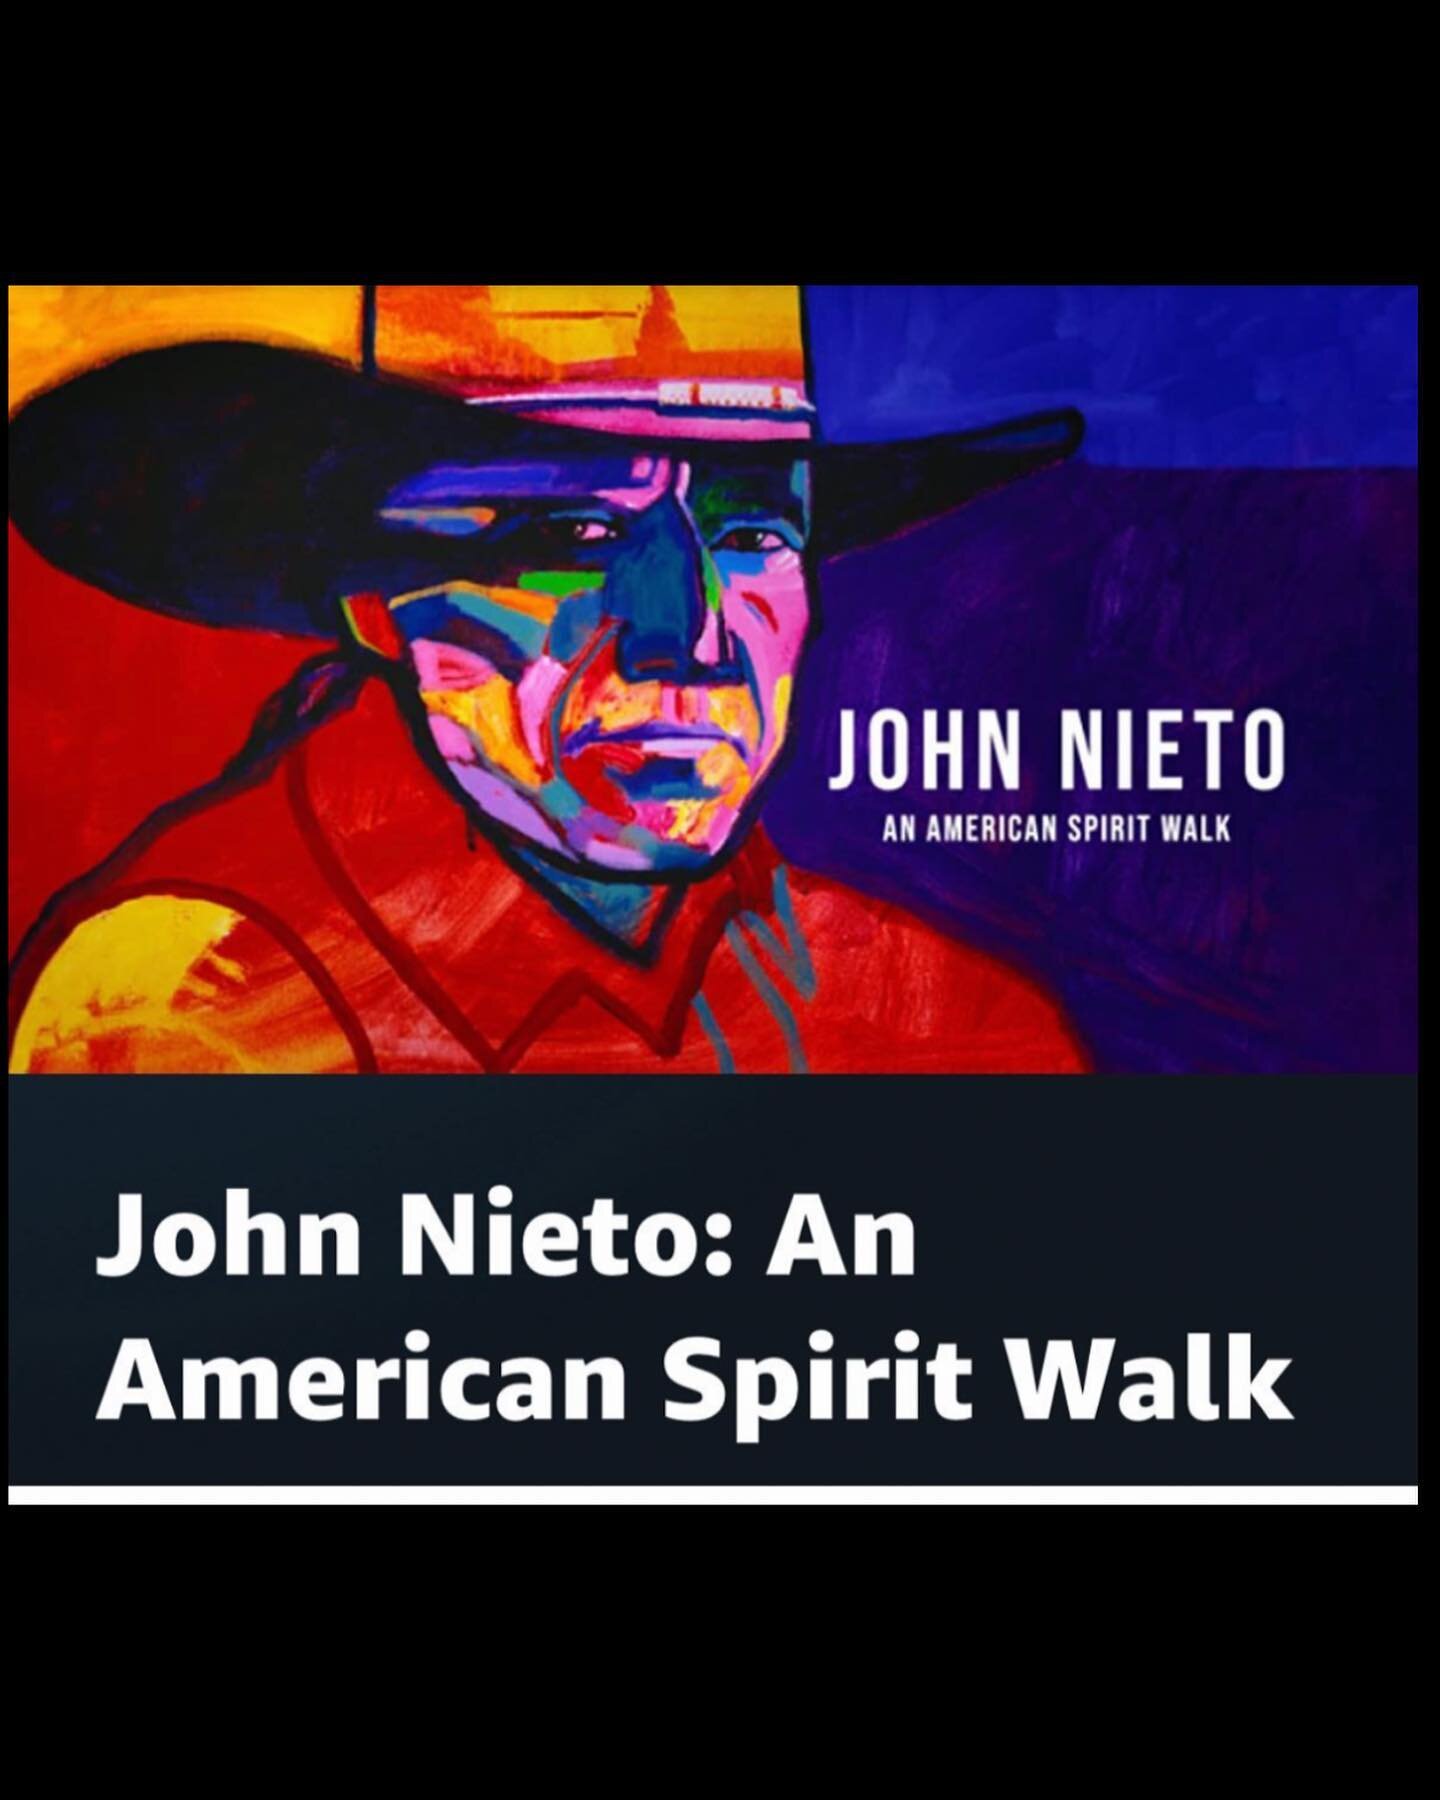 Amazon Prime this is a documentary about my daughter&rsquo;s fianc&eacute;&rsquo;s Father  John Nieto  #newmexico  #santafenewmexico #petermax #anayanieto